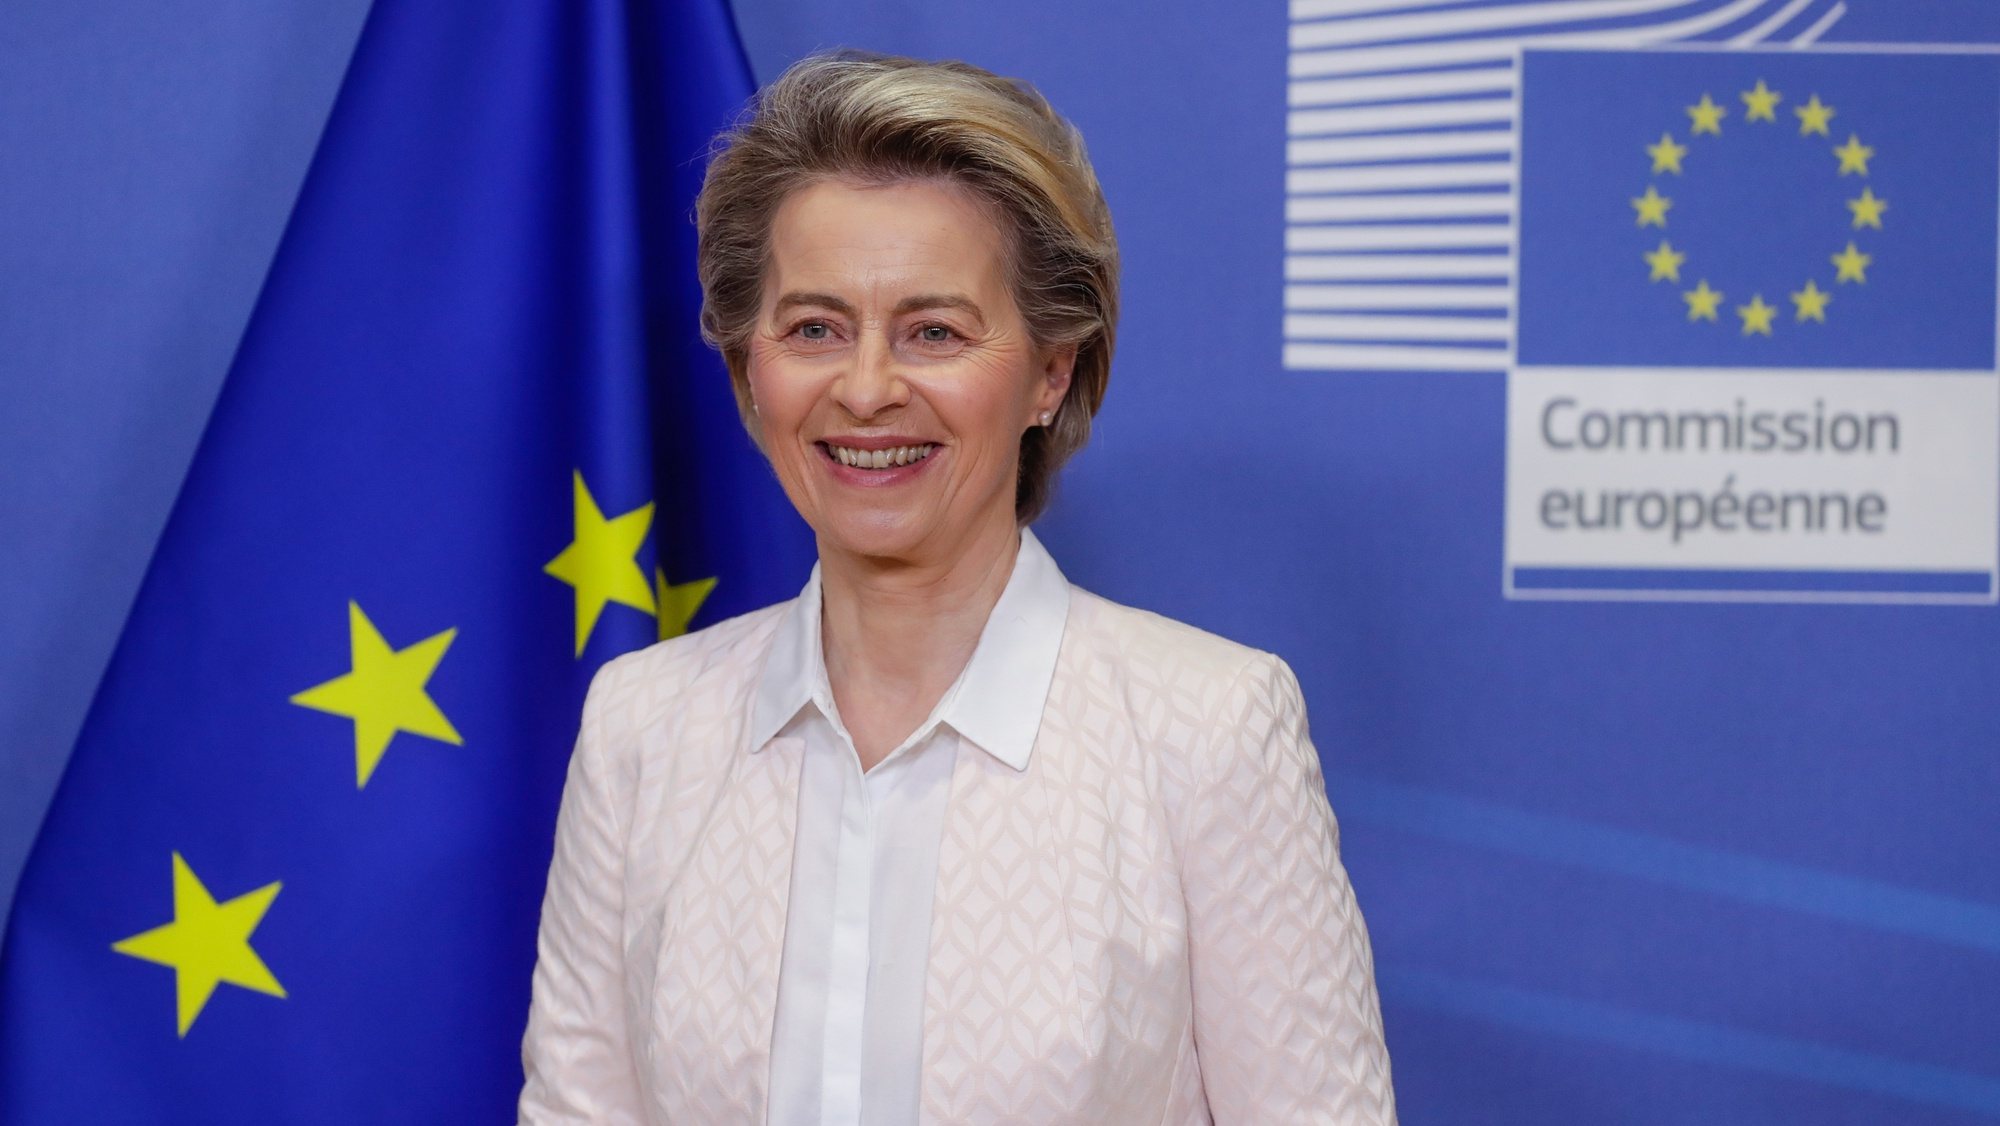 epa08936705 European Commission President Ursula Von Der Leyen welcomes European Parliament President David Sassoli (not pictured) ahead of a meeting at the European Commission in Brussels, Belgium, 14 January 2021.  EPA/STEPHANIE LECOCQ / POOL